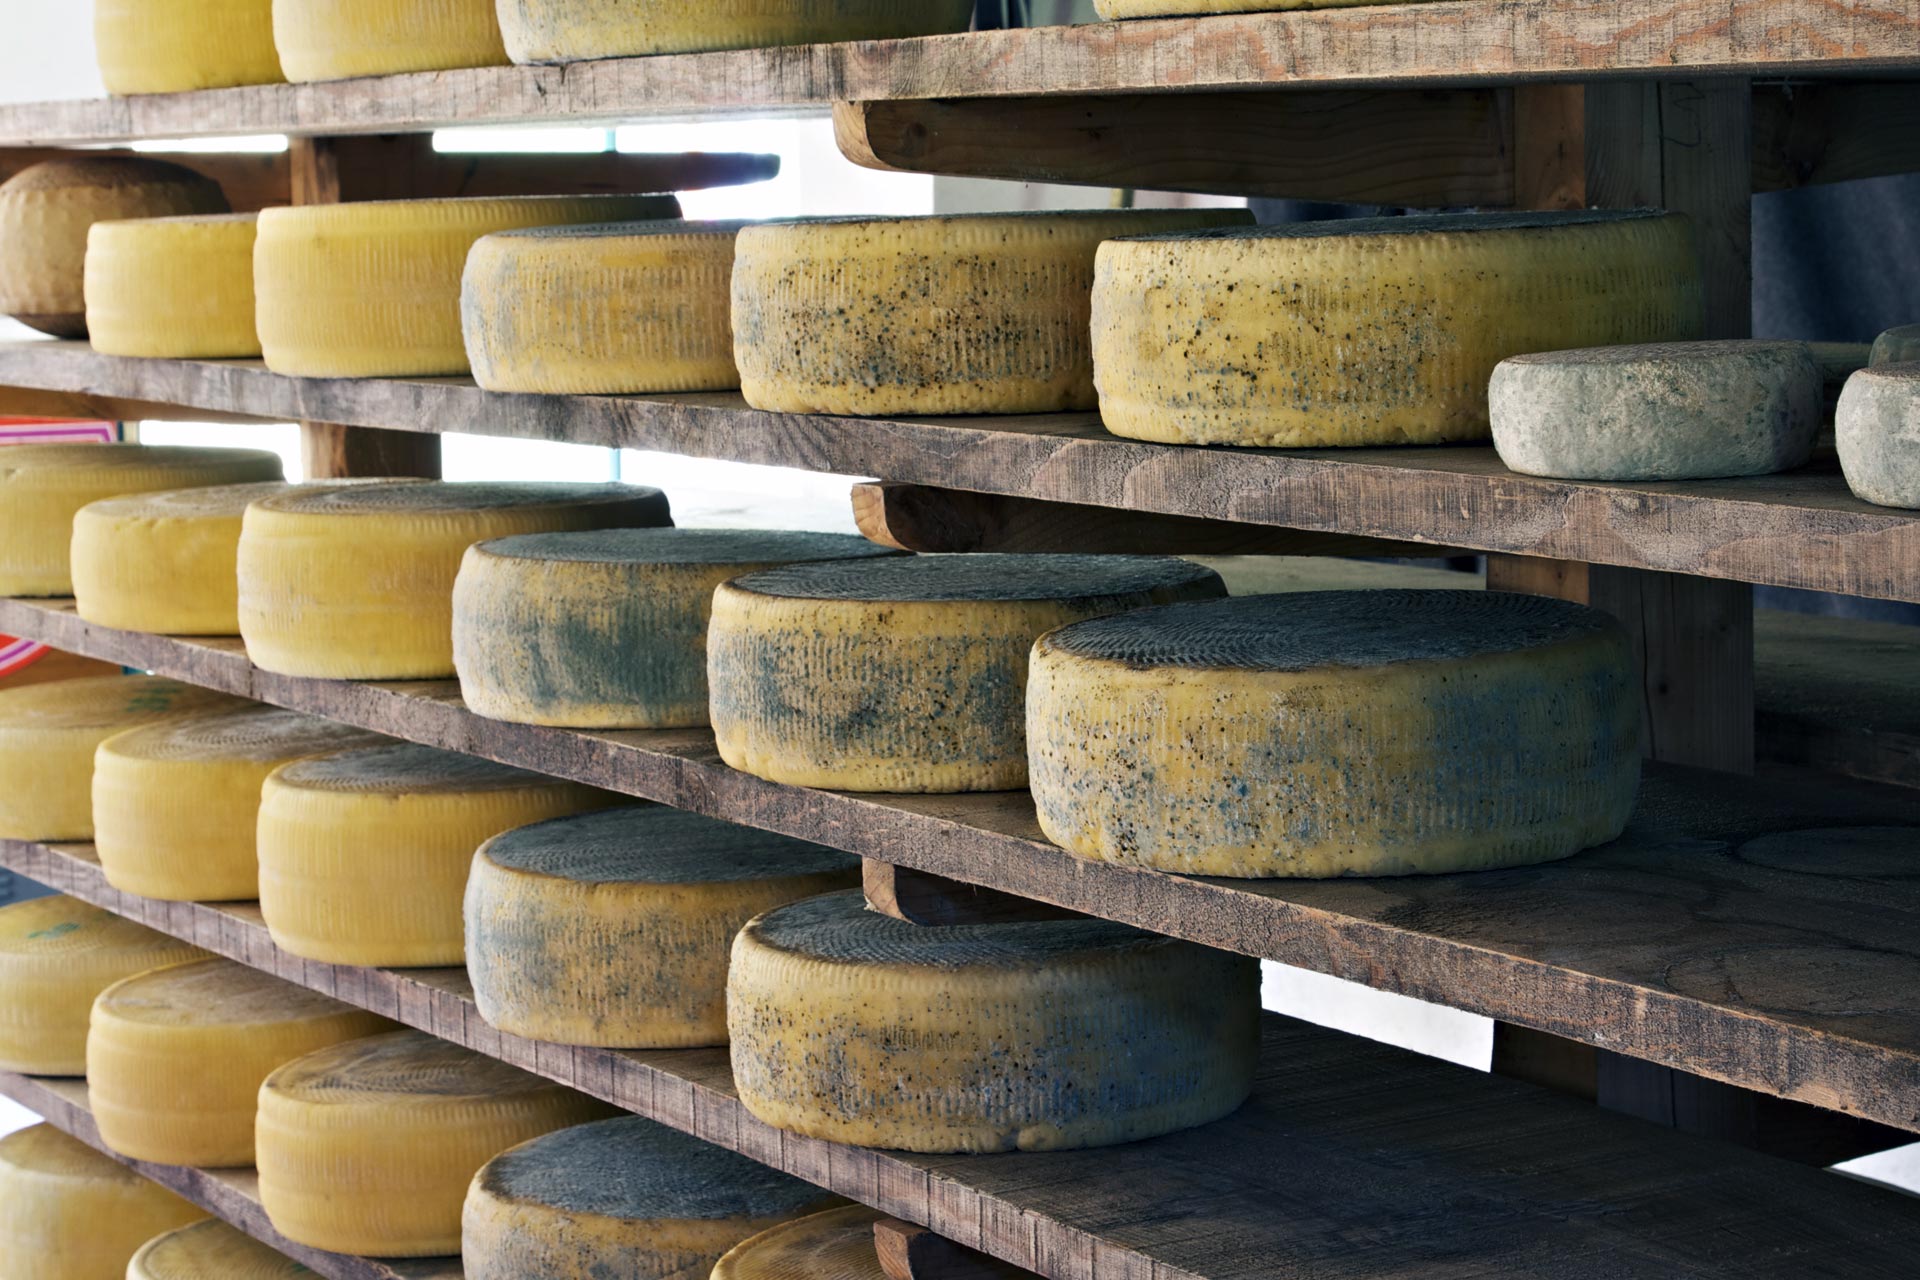 wheels of cheese aging on shelves